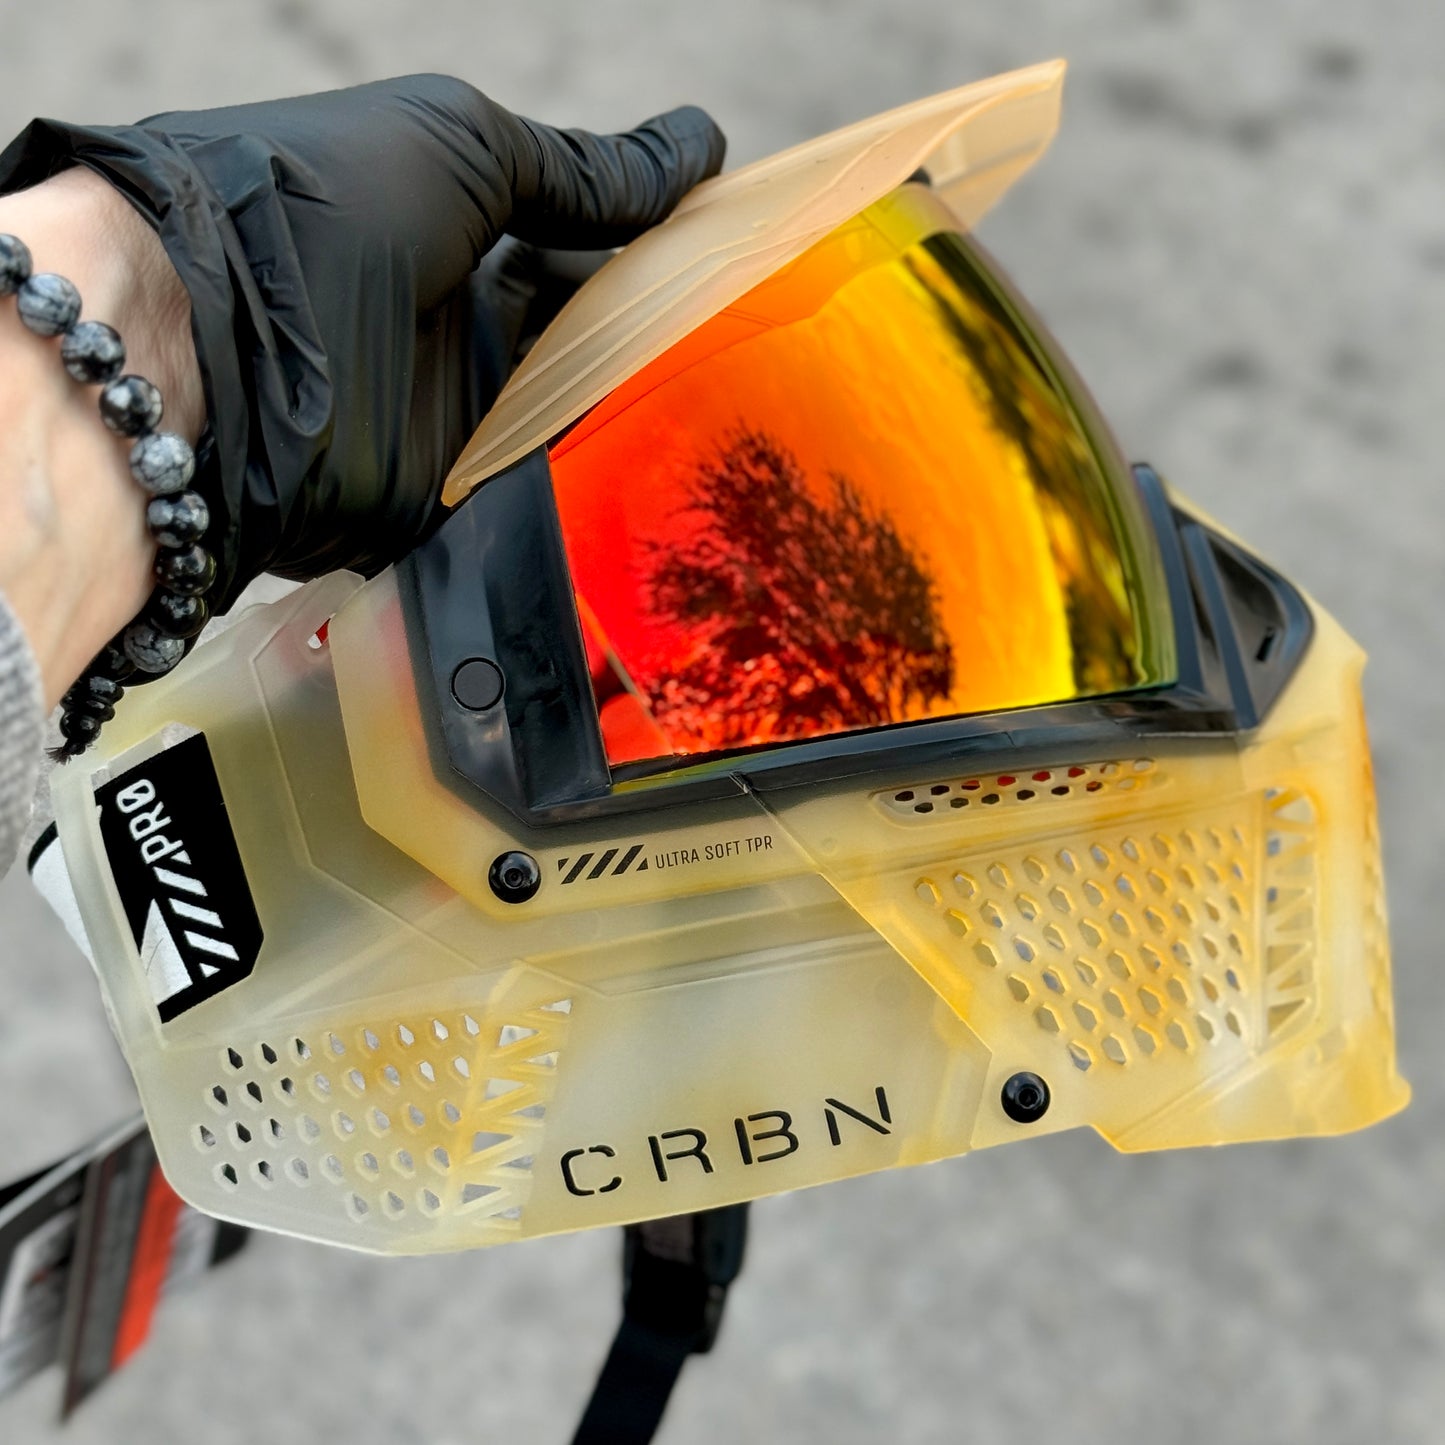 REF ORANGE YELLOW CRBN PRO CLEAR LESS COVERAGE